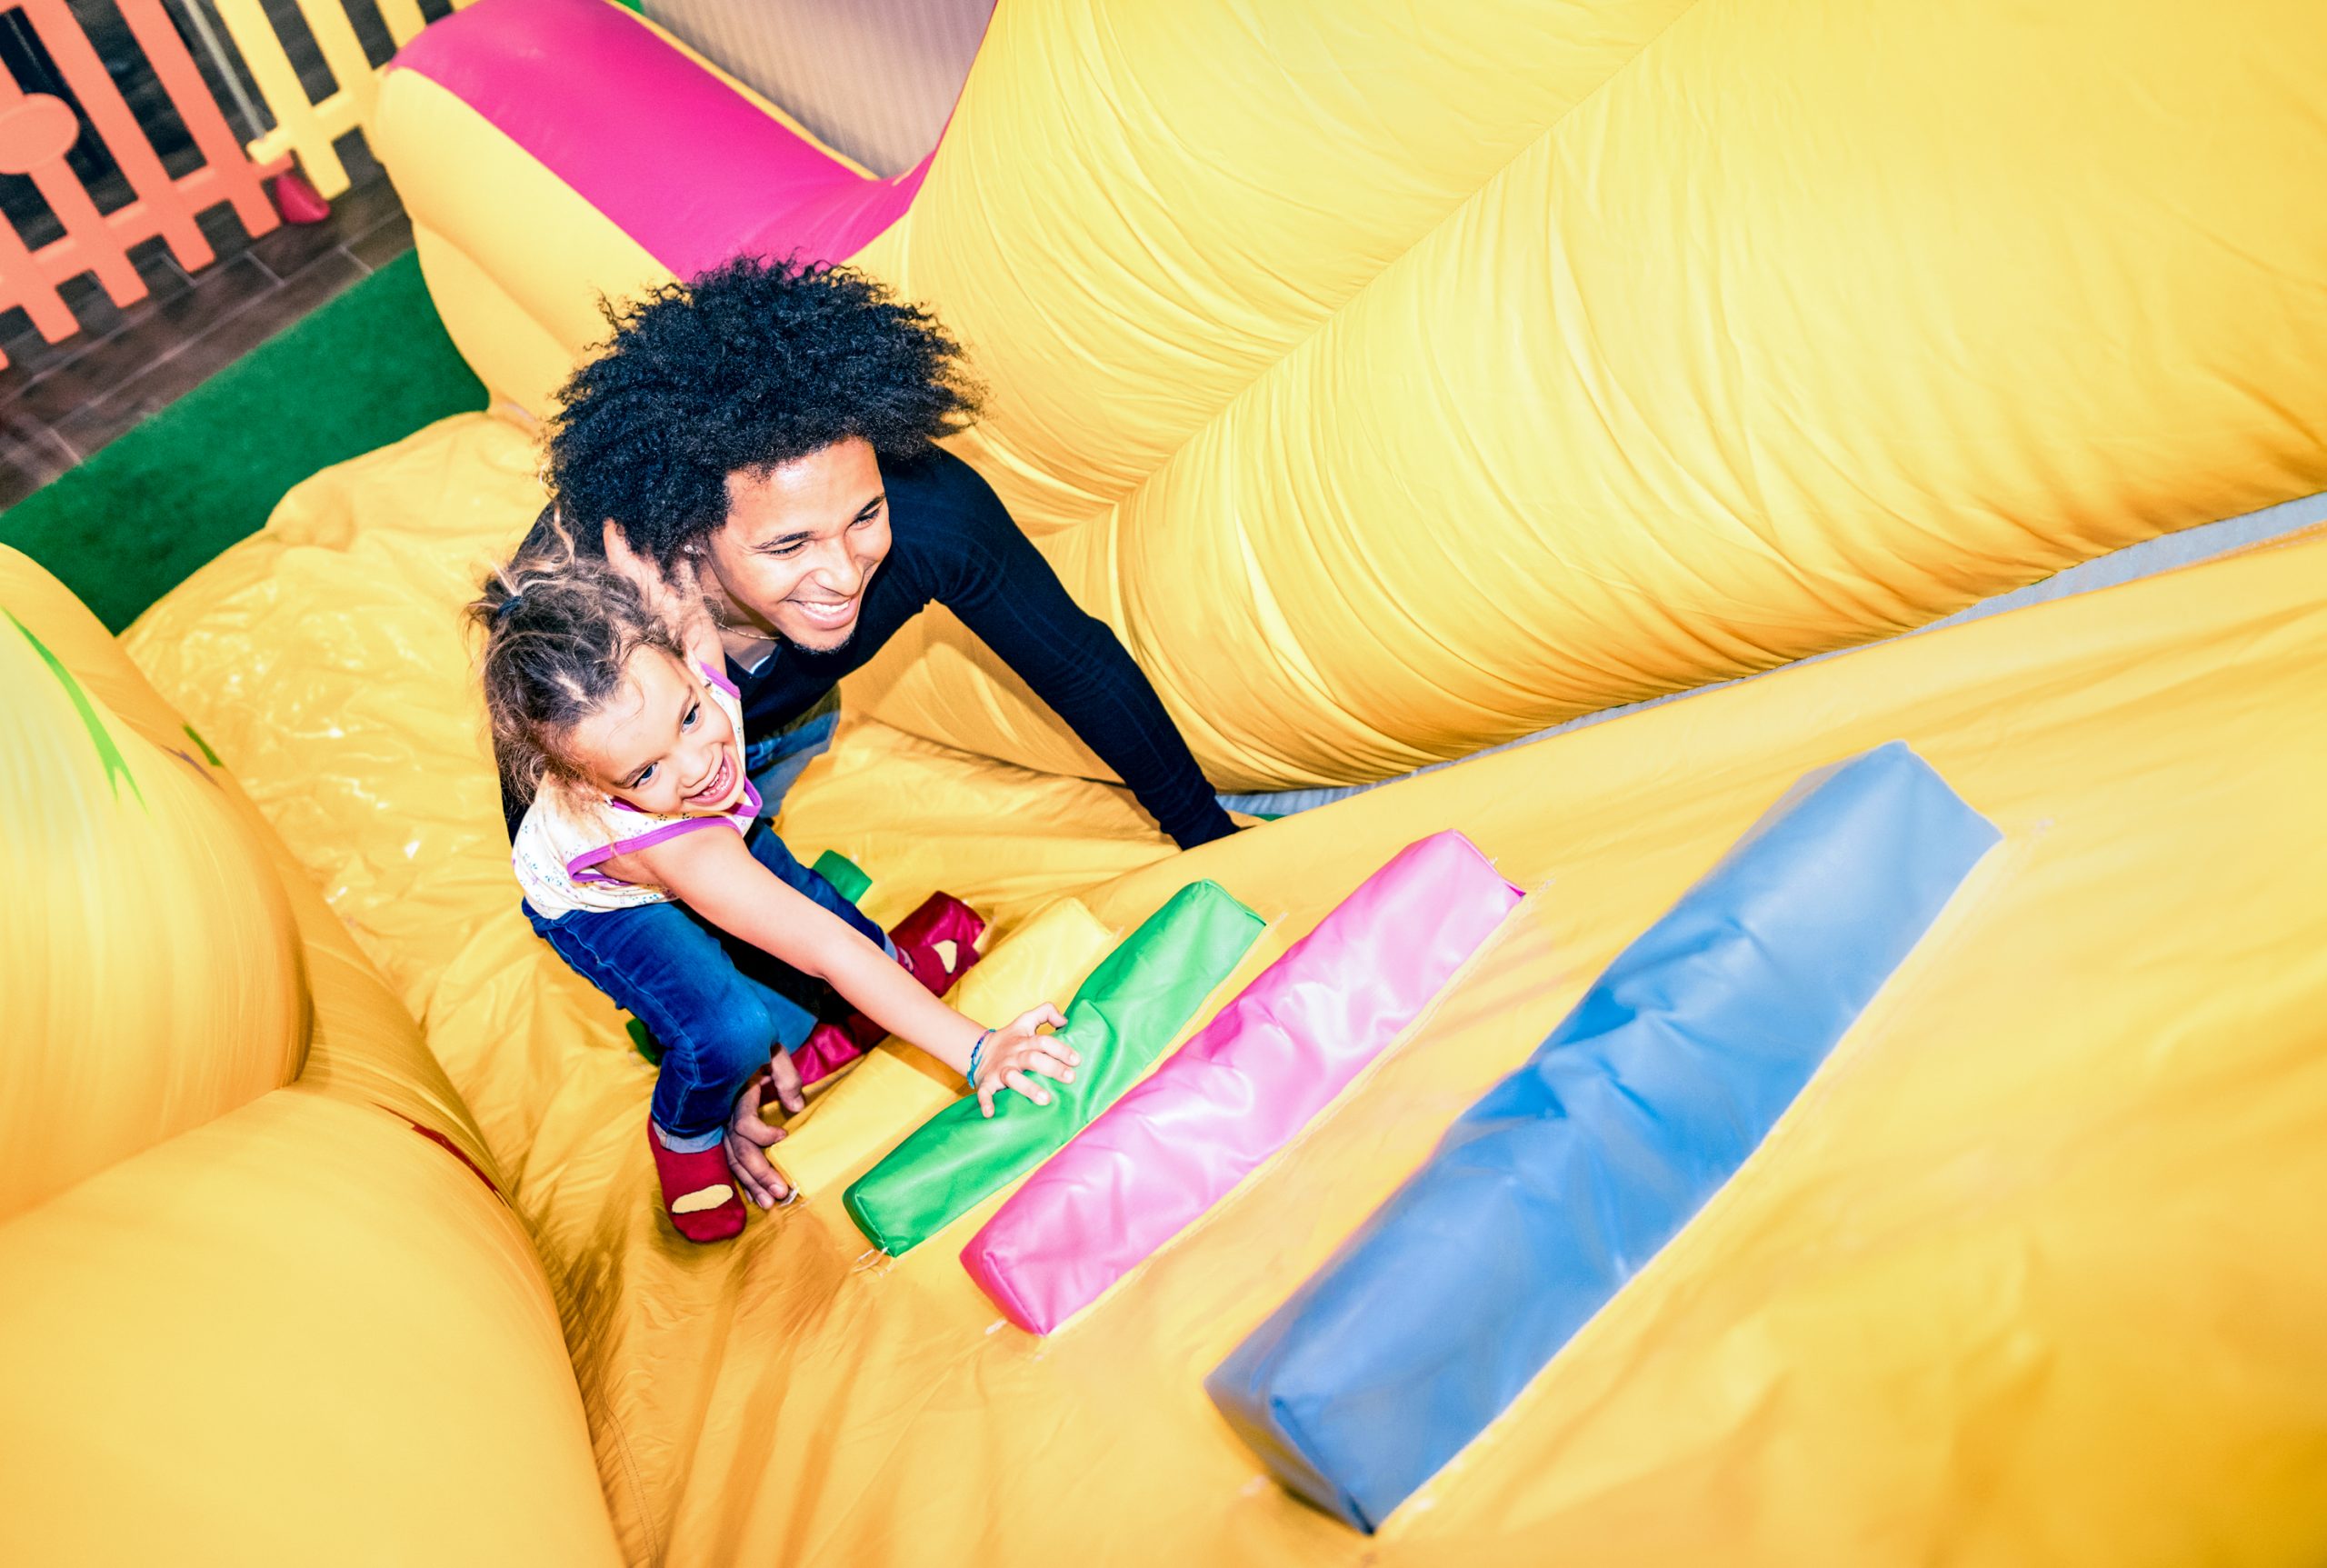 Latin american dad playing with mixed race daughter on inflatable slide at kindergarten playroom - Family concept with happy multiracial child and father having fun together at kids playground toyroom